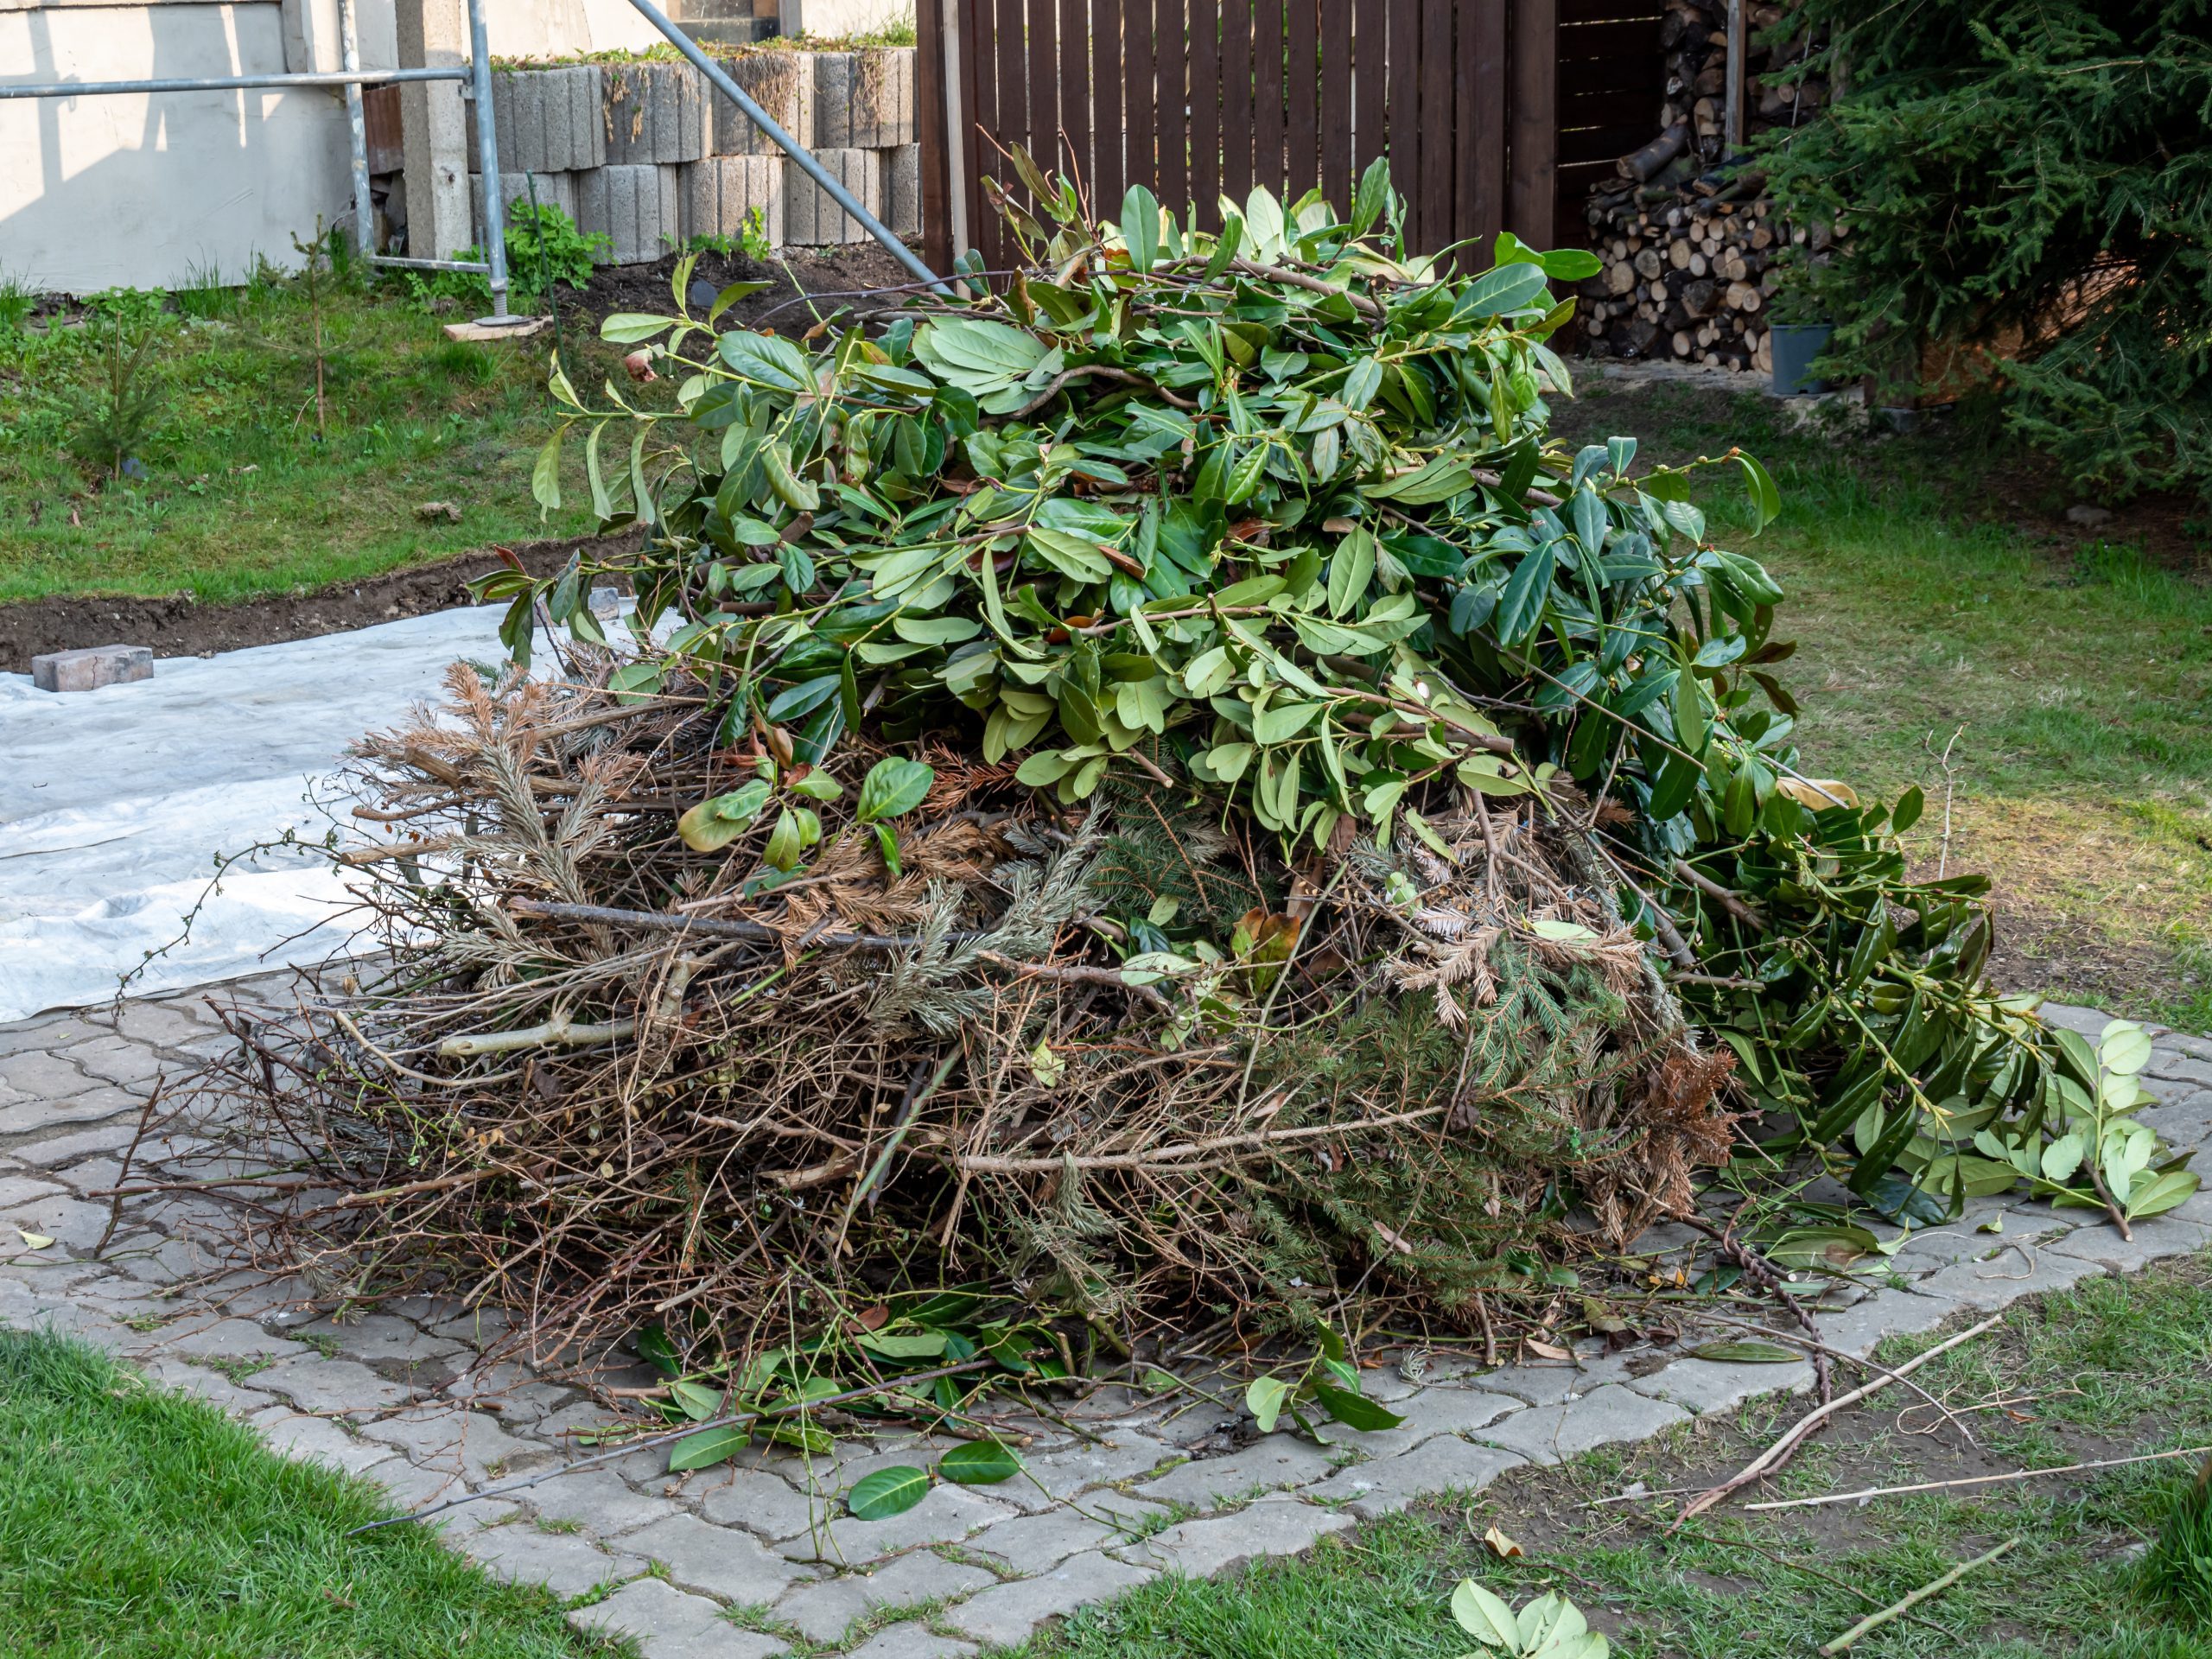 Do I need to bag or bundle the yard waste before The Junk Guys arrive? - faq - The Junk Guys